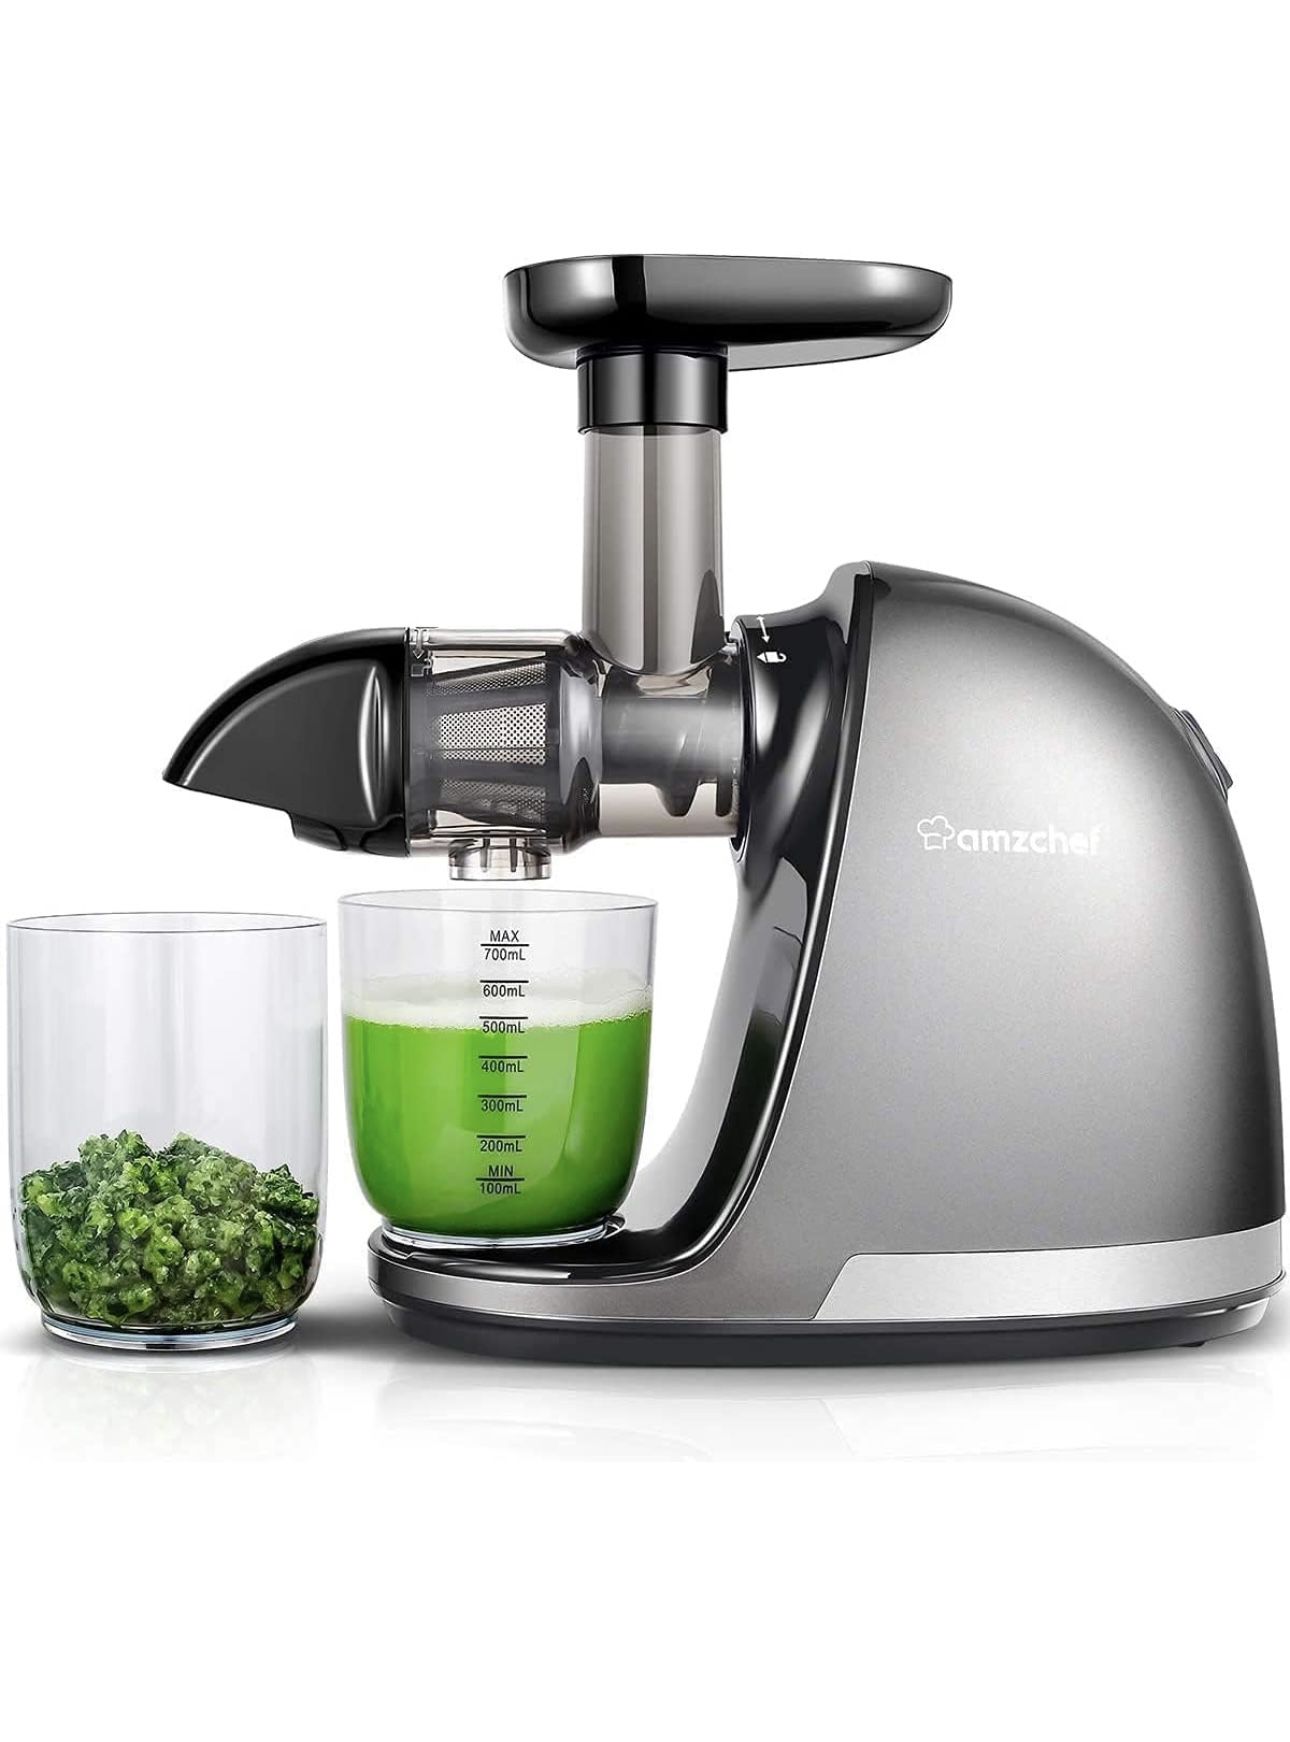 Masticating Juicer Machines, AMZCHEF Slow Cold Press Juicer with Reverse Function, High Juice Yield, Easy Clean with Brush,Recipes for High Nutrient F